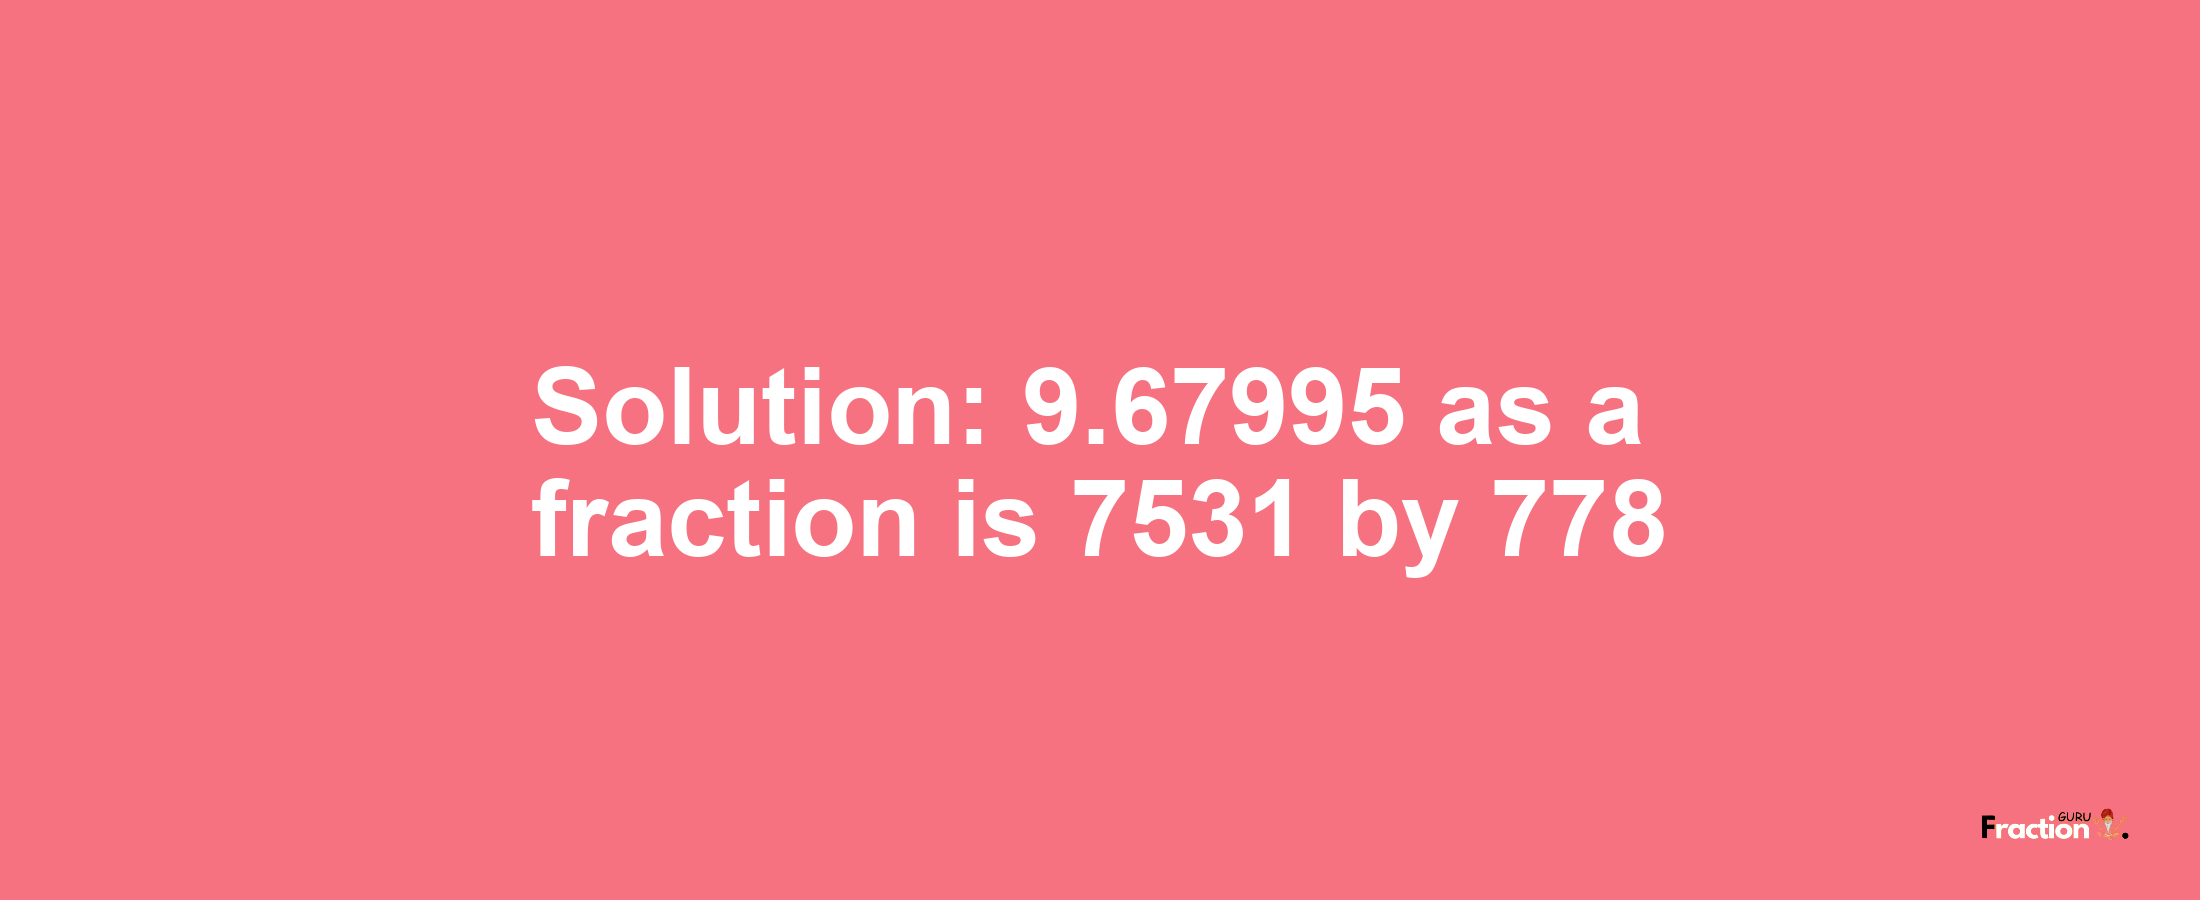 Solution:9.67995 as a fraction is 7531/778